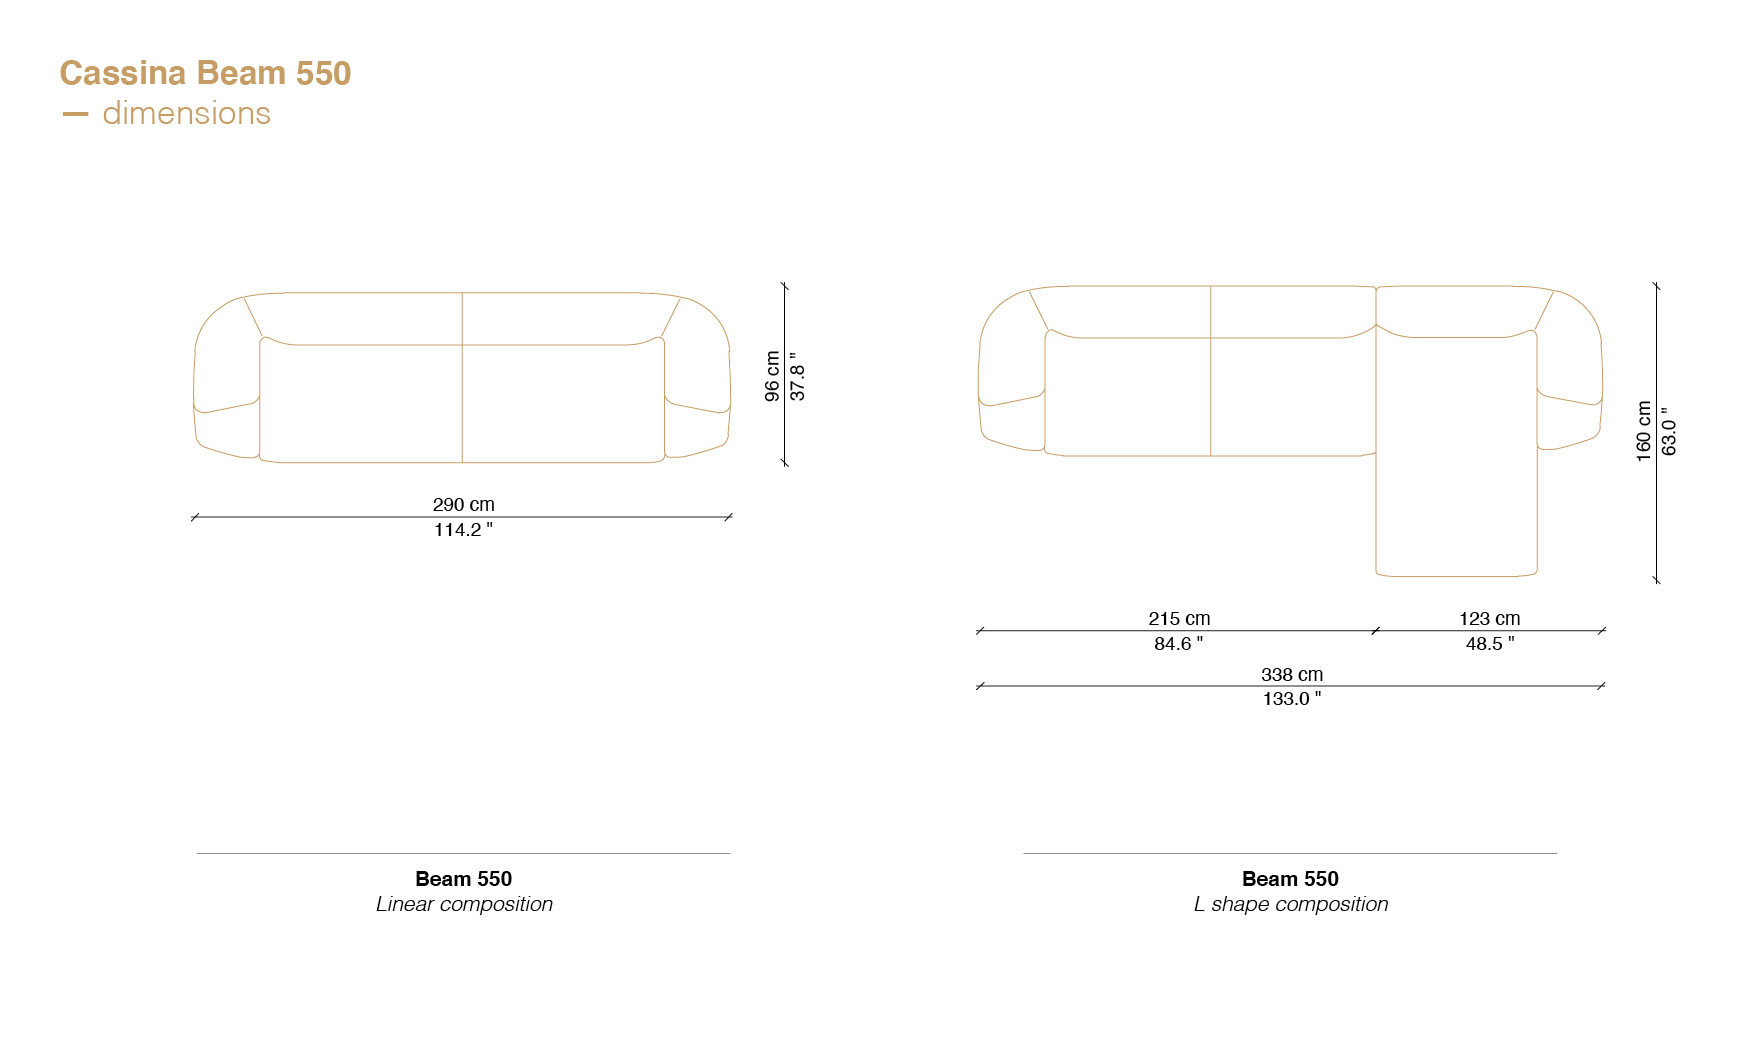 Mex Beam sofa compositions and different Cassina sofa price